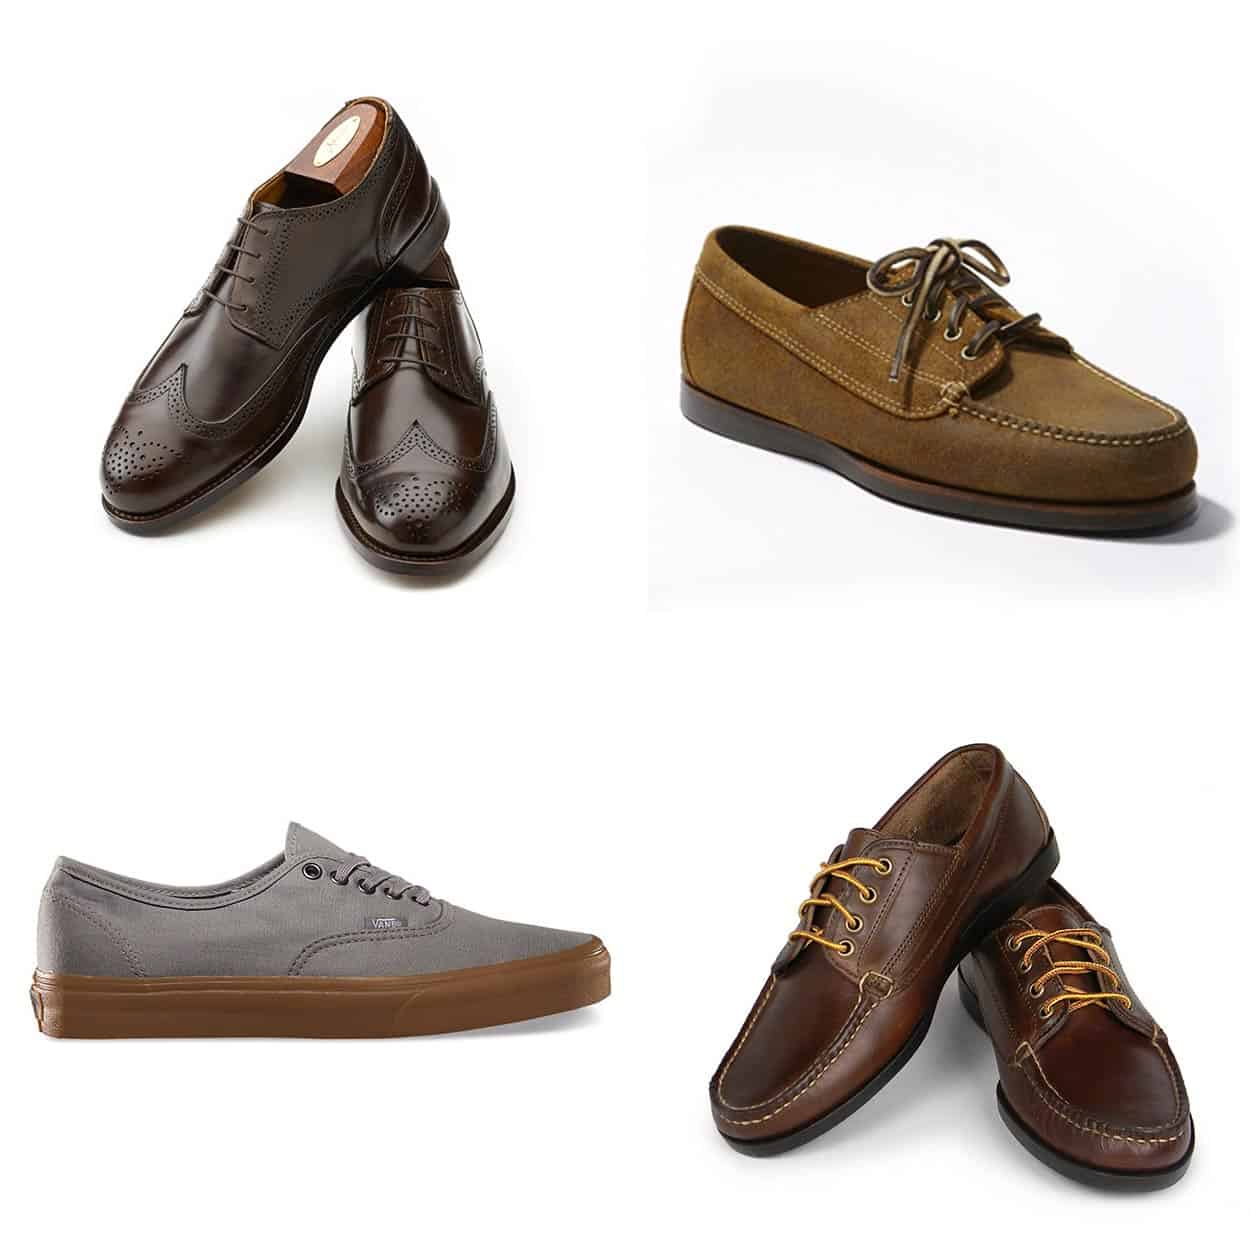 Summer Footwear: 4 Styles to Keep You Cool this Summer - Worn & Wound